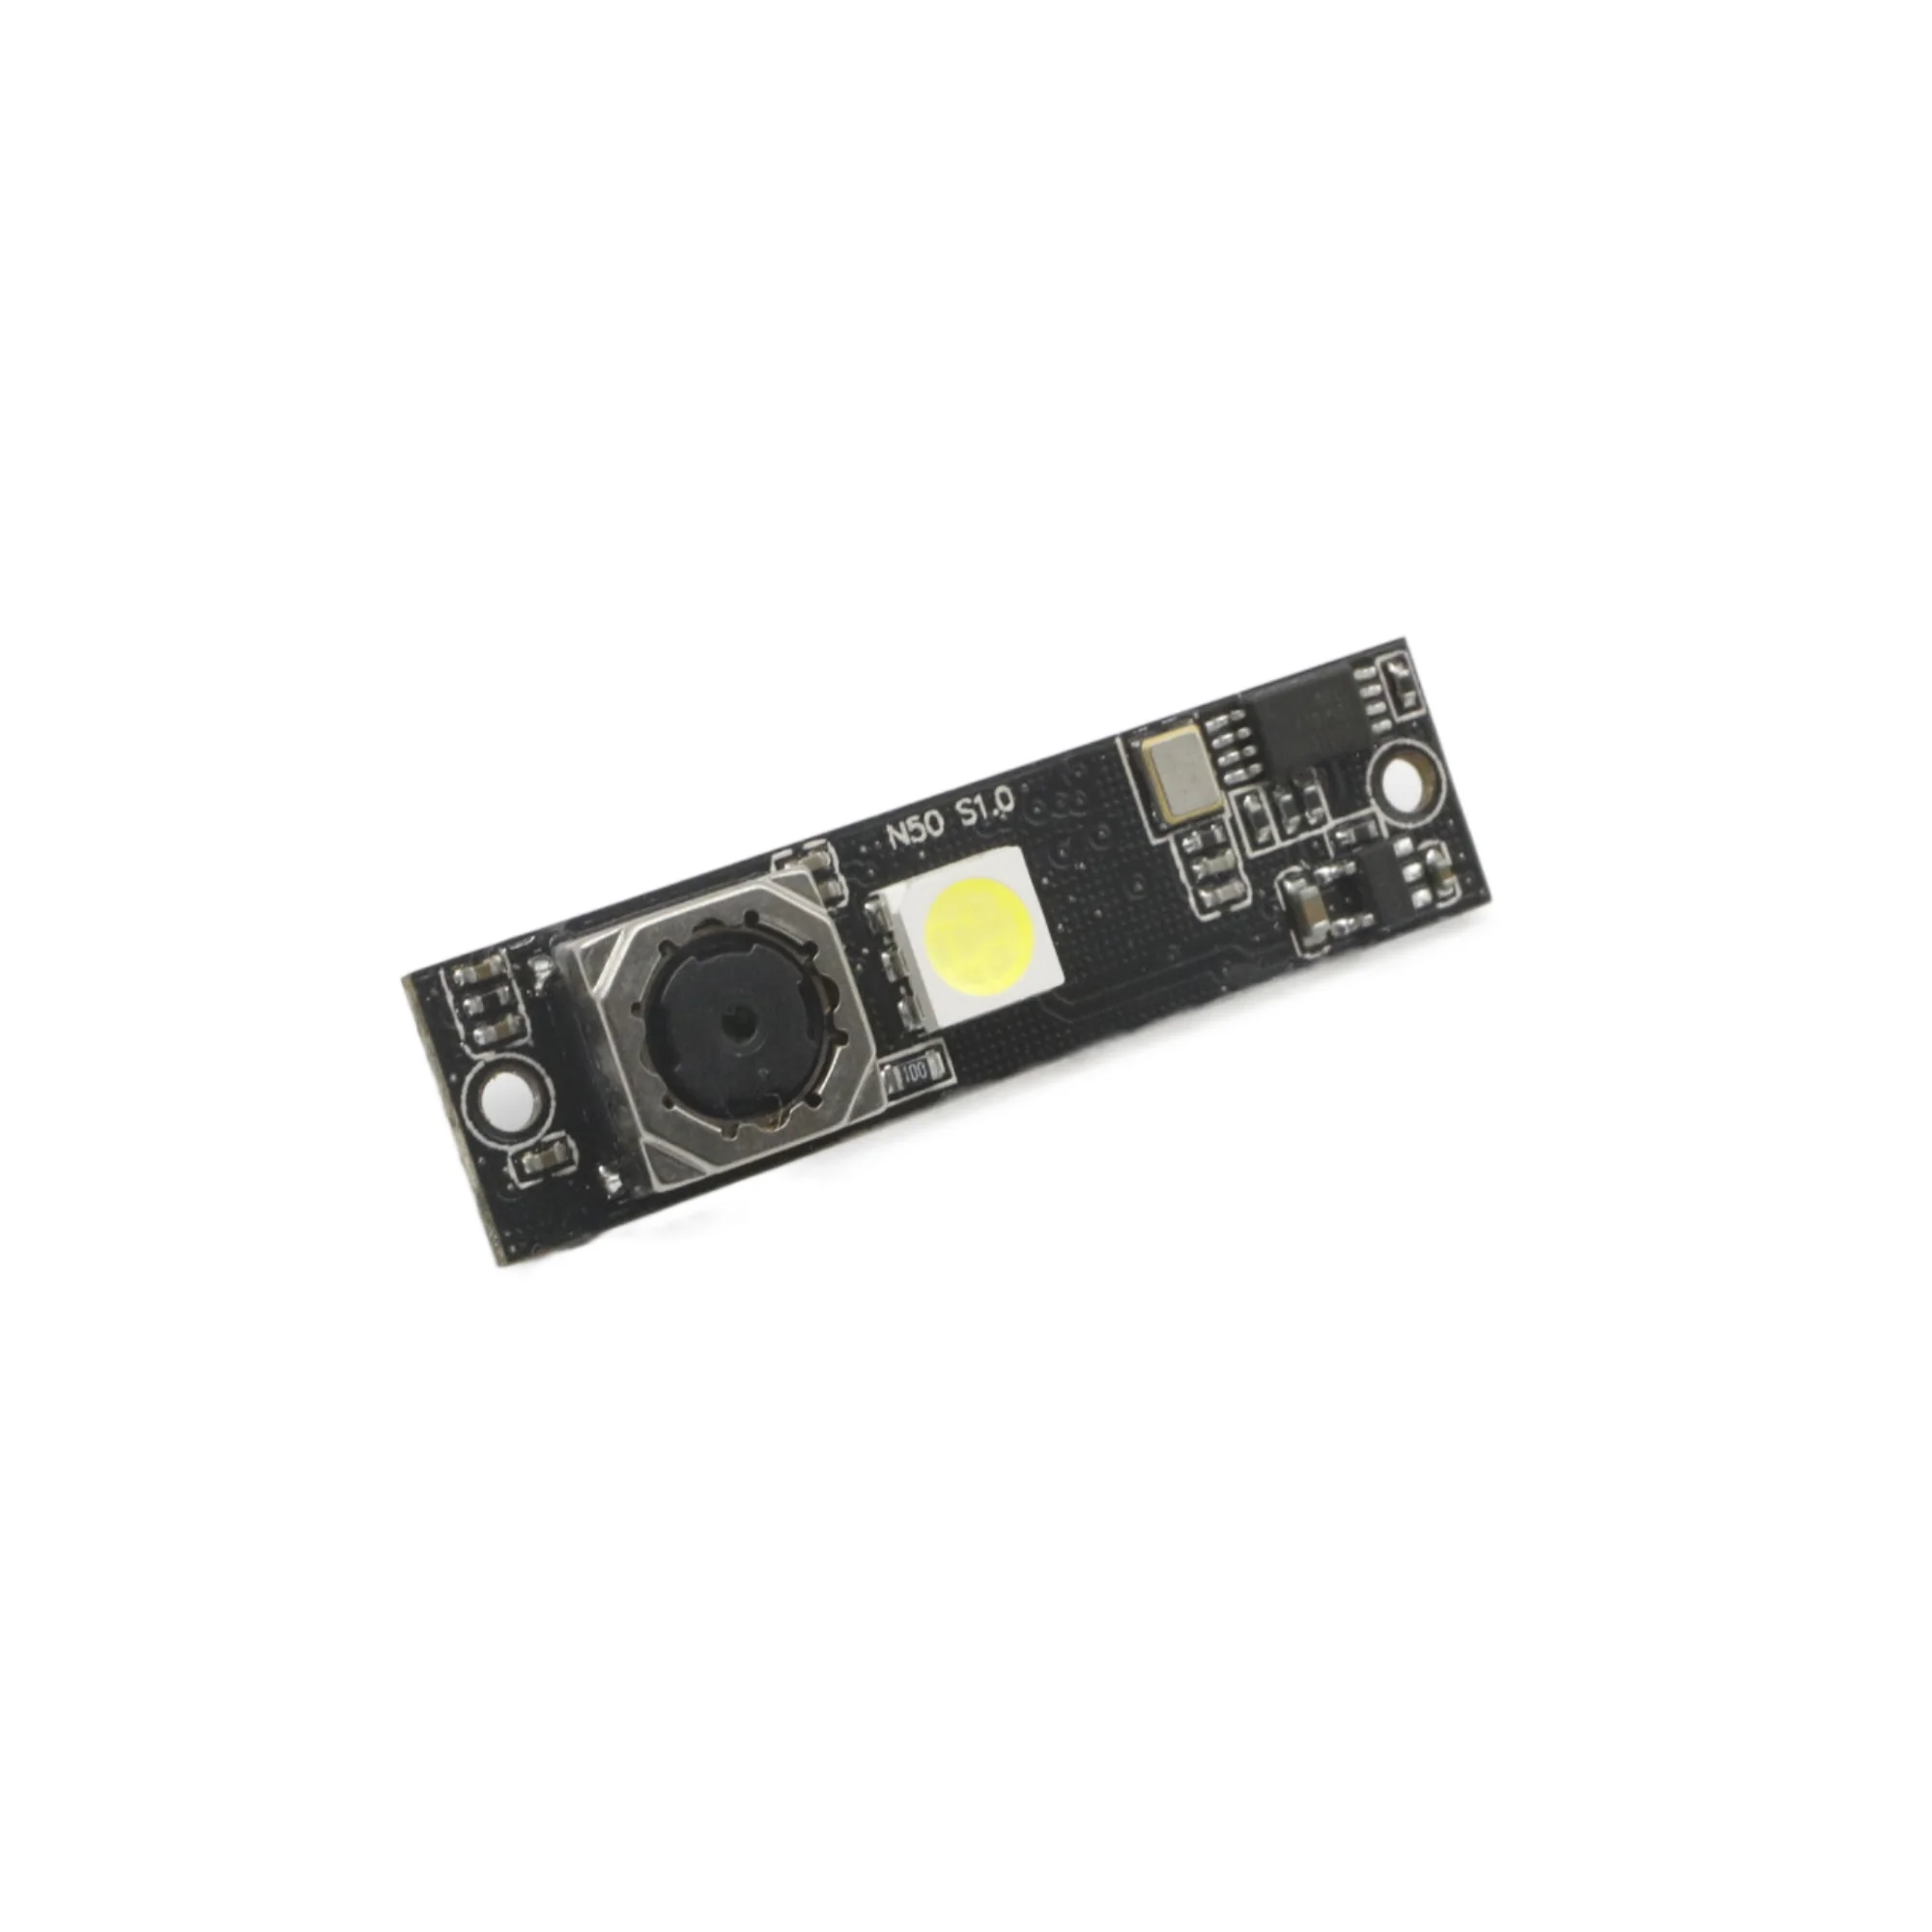 

5MP OV5640 Sensor Camera Module For Laptop Tablets Computer PC Zoom Camera Two-way Audio CMOS 15FPS USB Interface